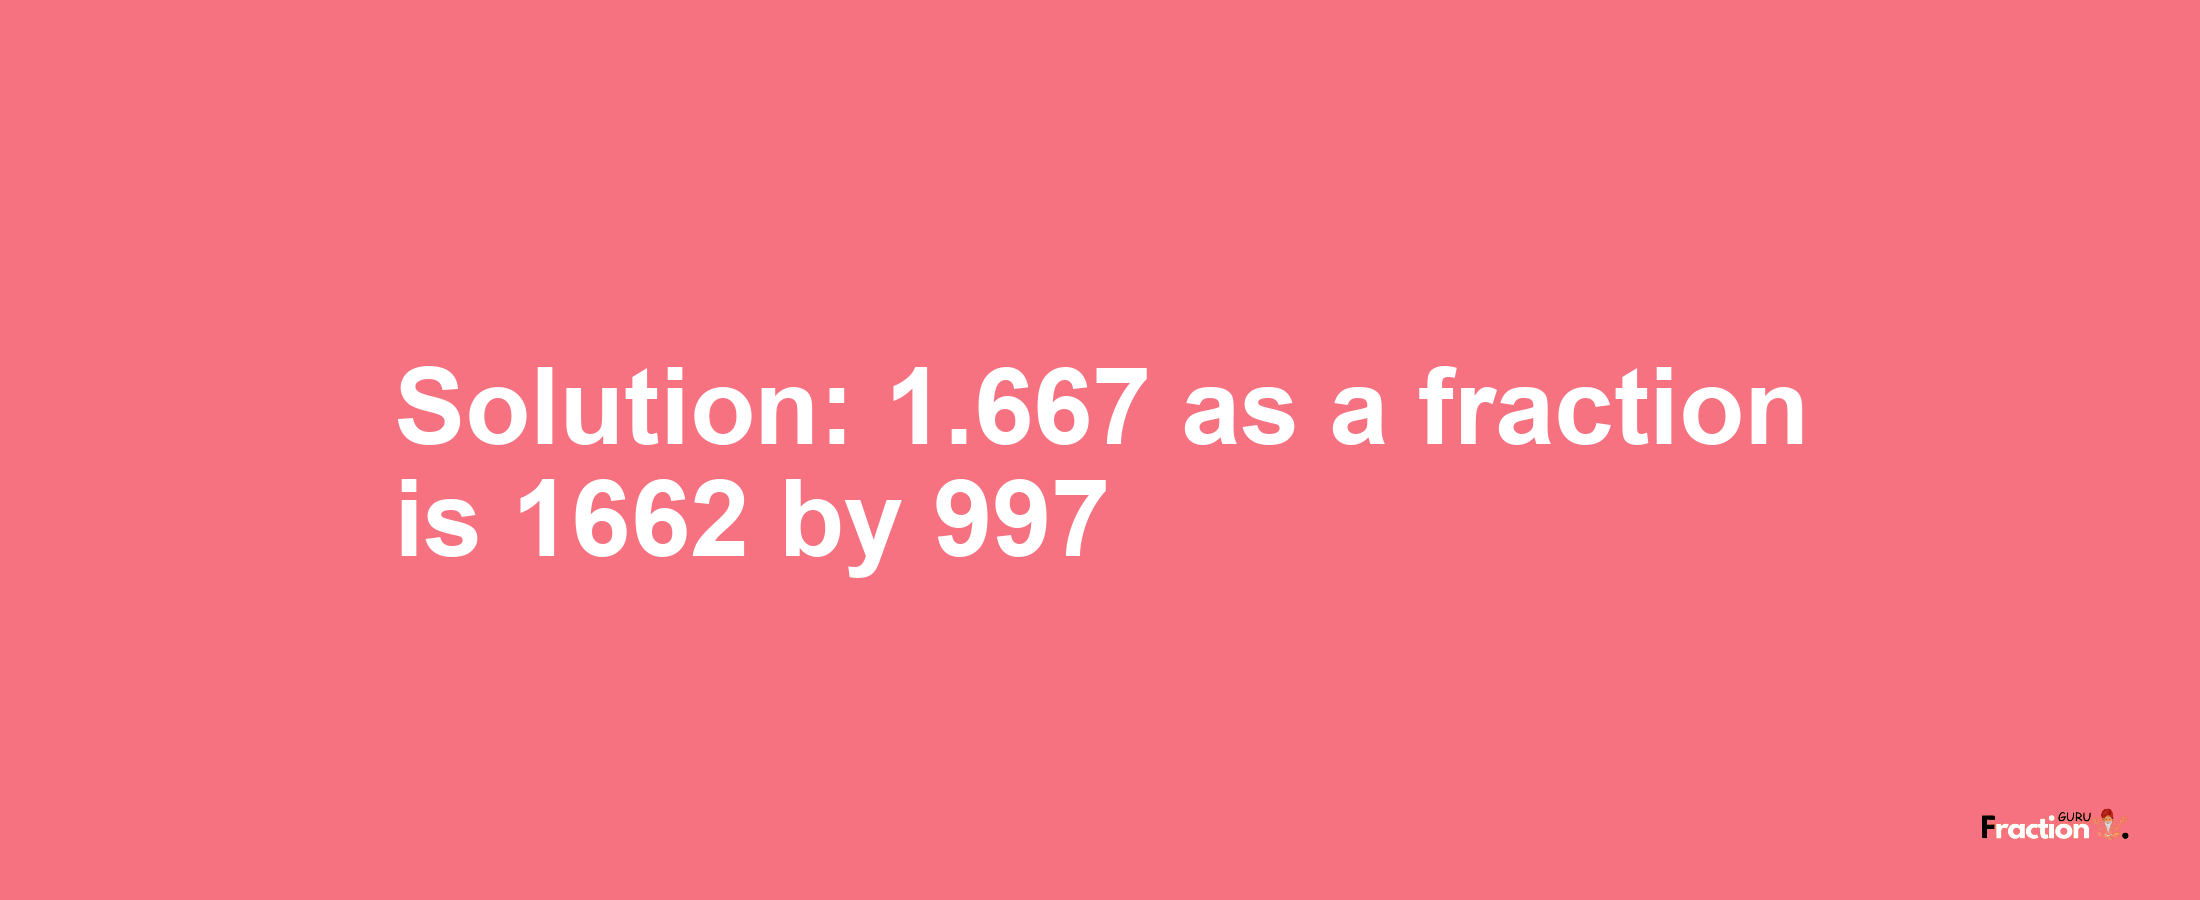 Solution:1.667 as a fraction is 1662/997